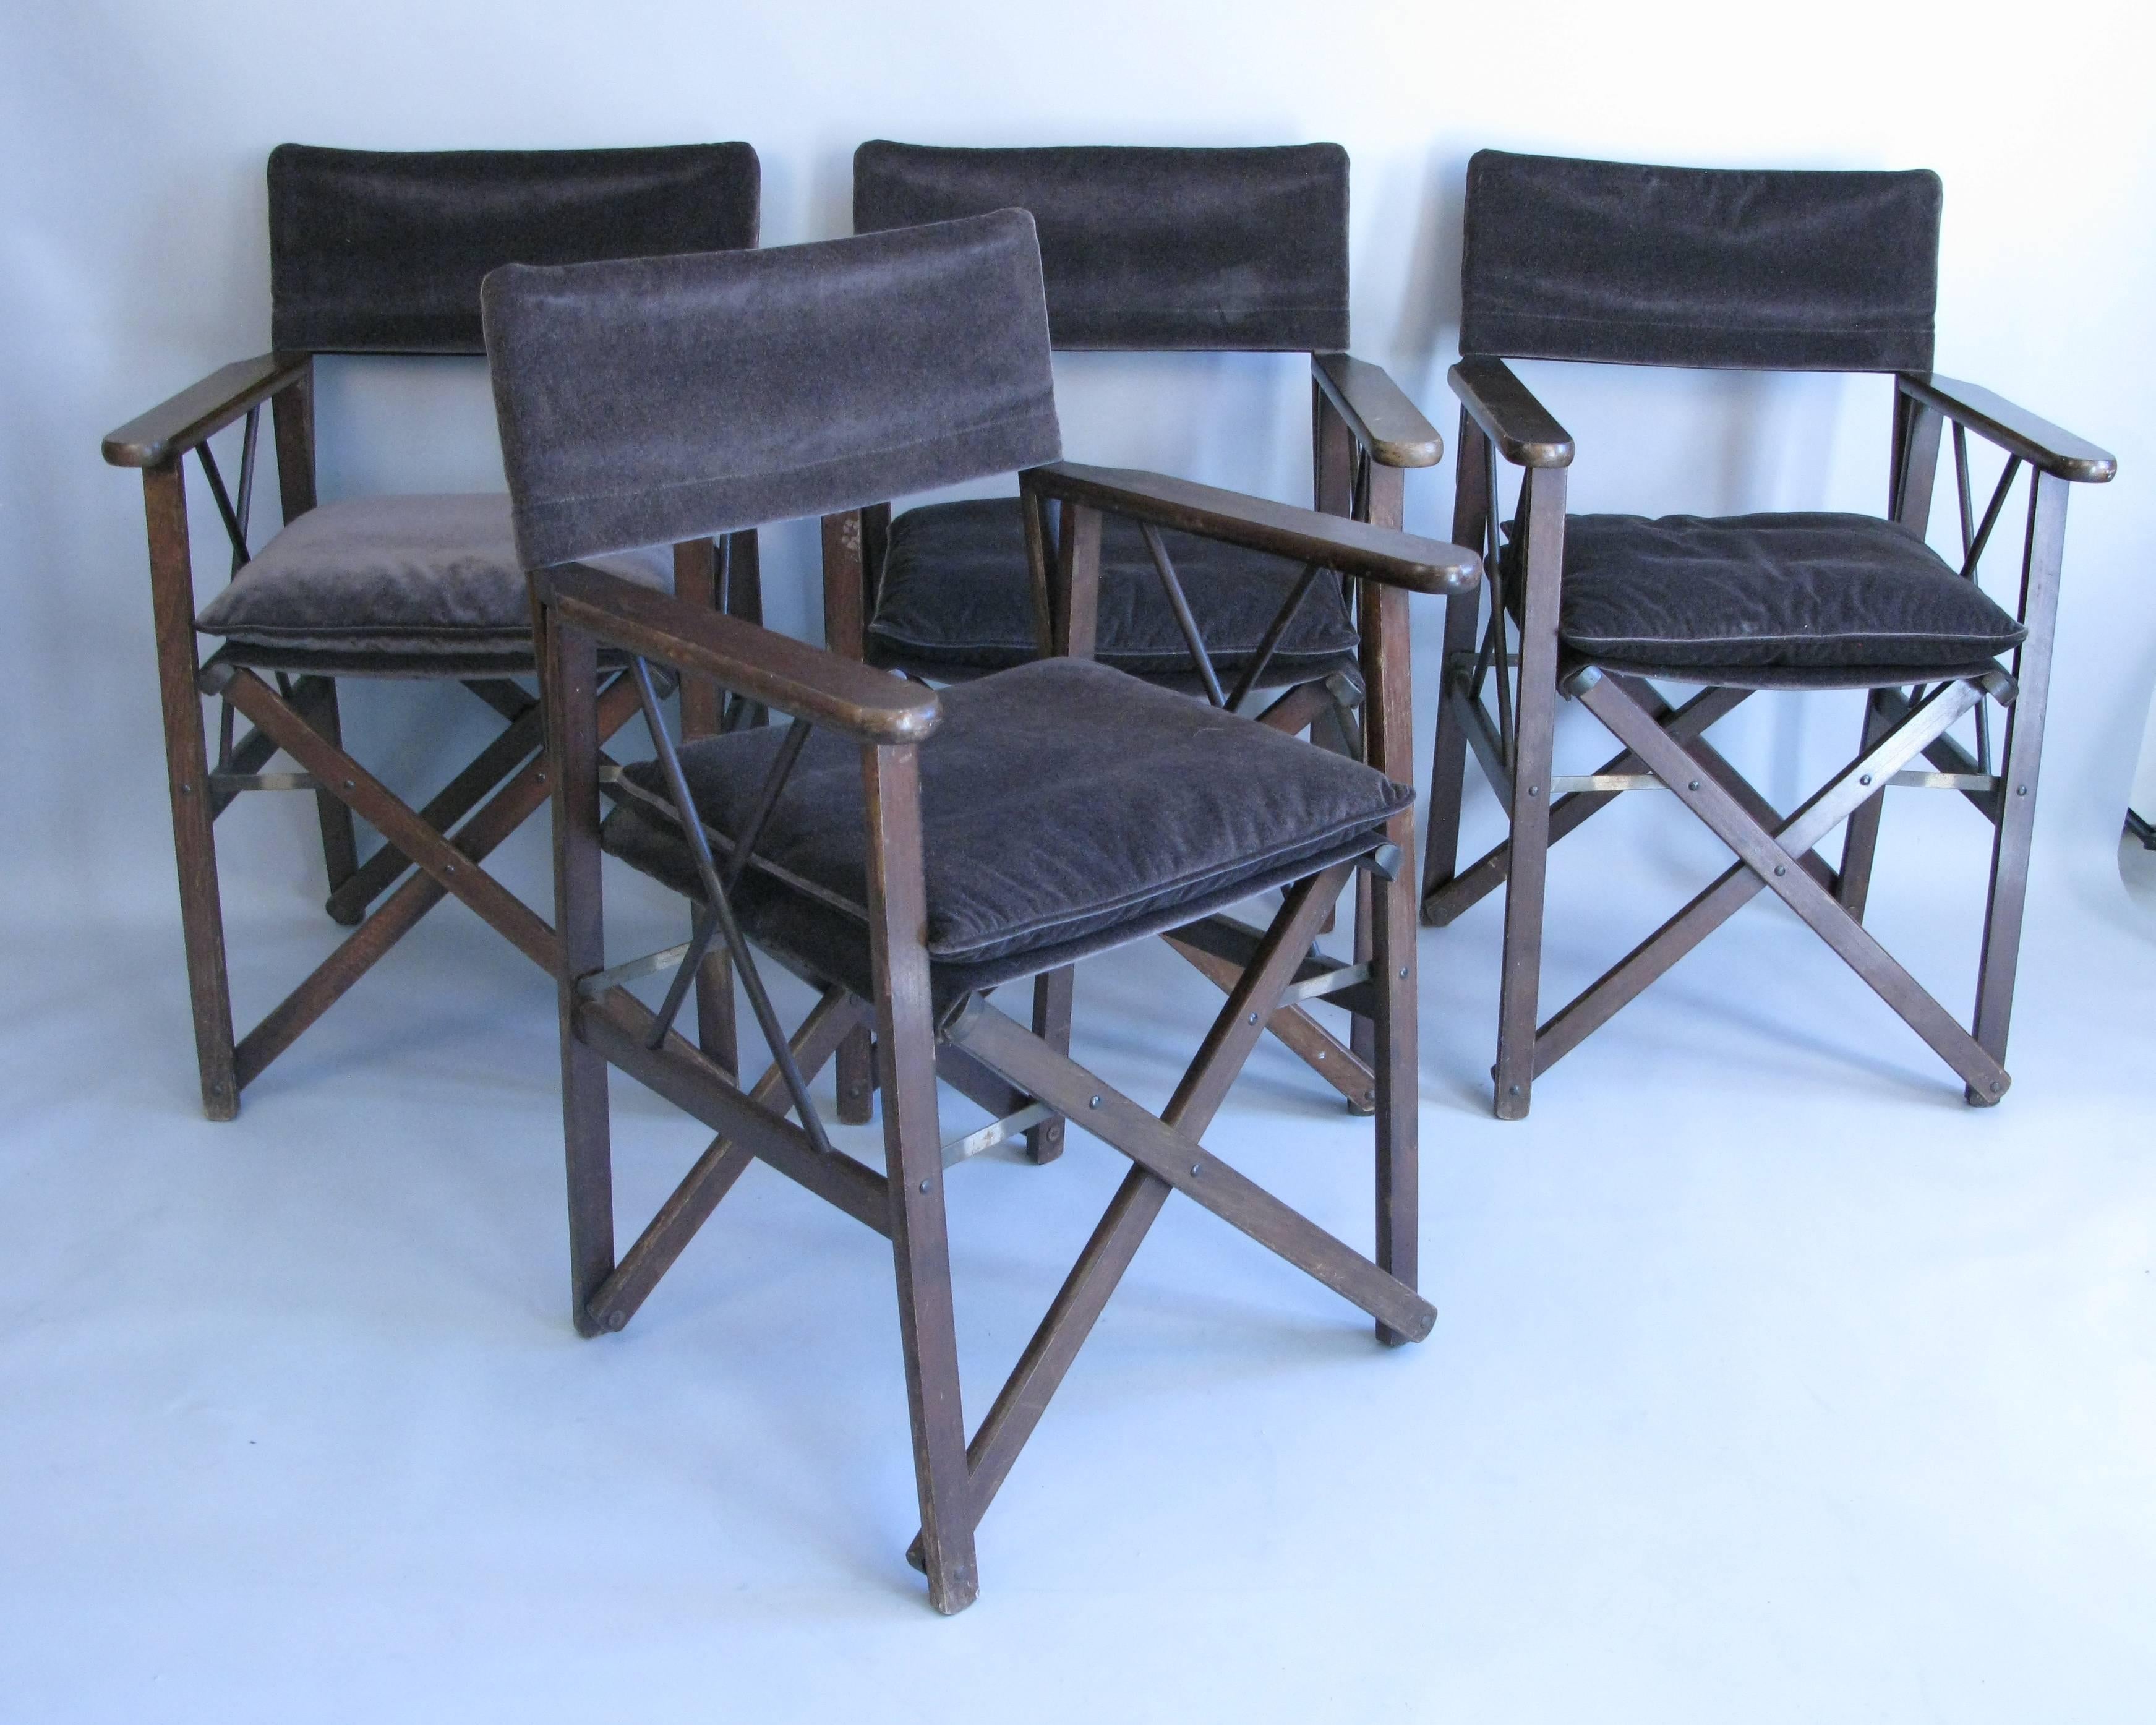 A wonderful set of 1940s folding pull up armchairs. The chairs are comfortable and can fold for storage. They have been upholstered in gray velvet fabric that is in great condition. The chairs are a good heavy weight and sturdy.